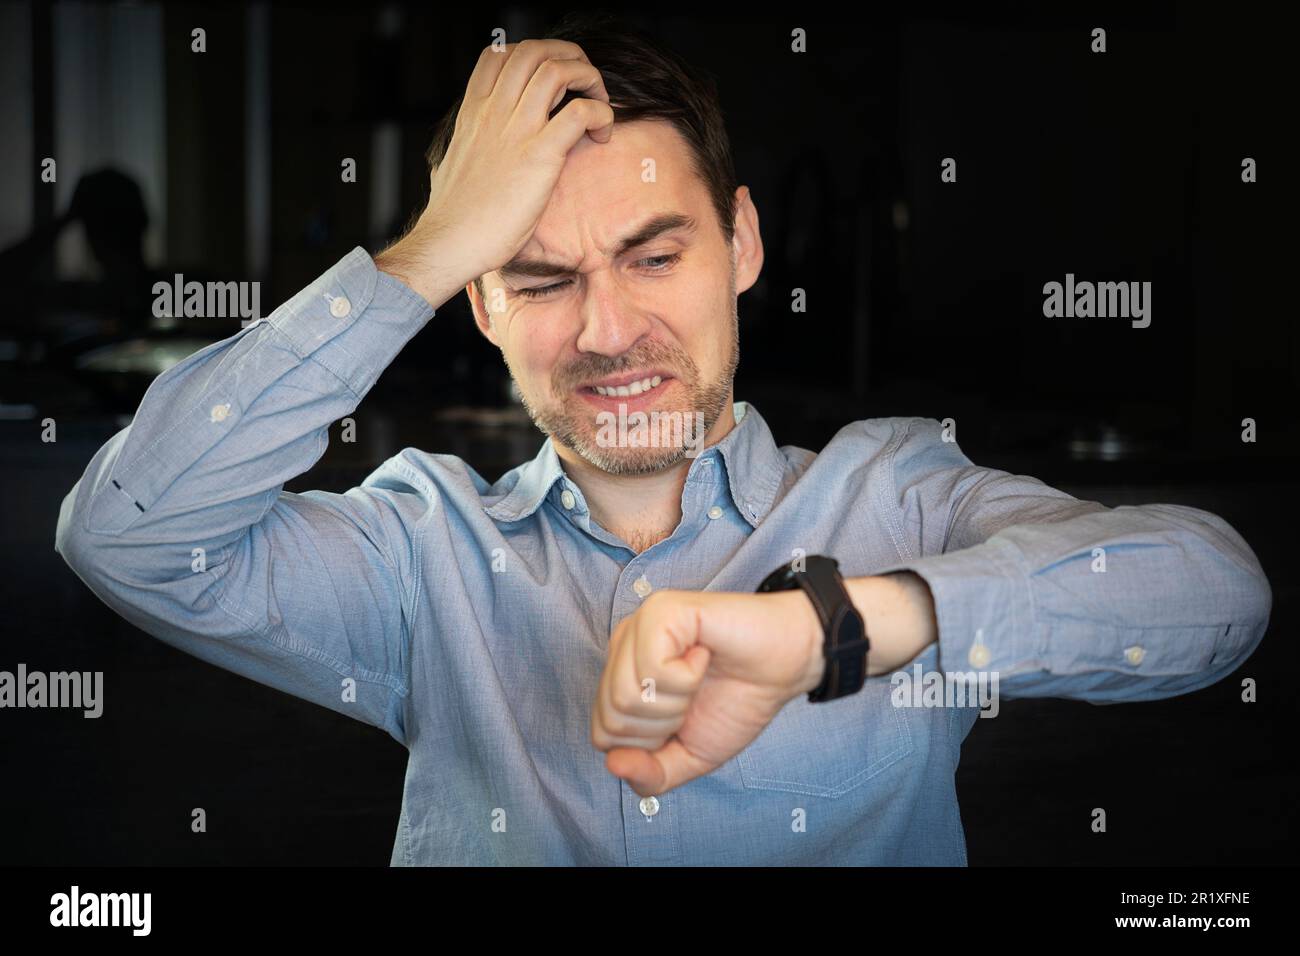 Emotional man checking time on black background. Being late concept. concept of being late for work, breaking deadlines in business, a hard deadline. Stock Photo